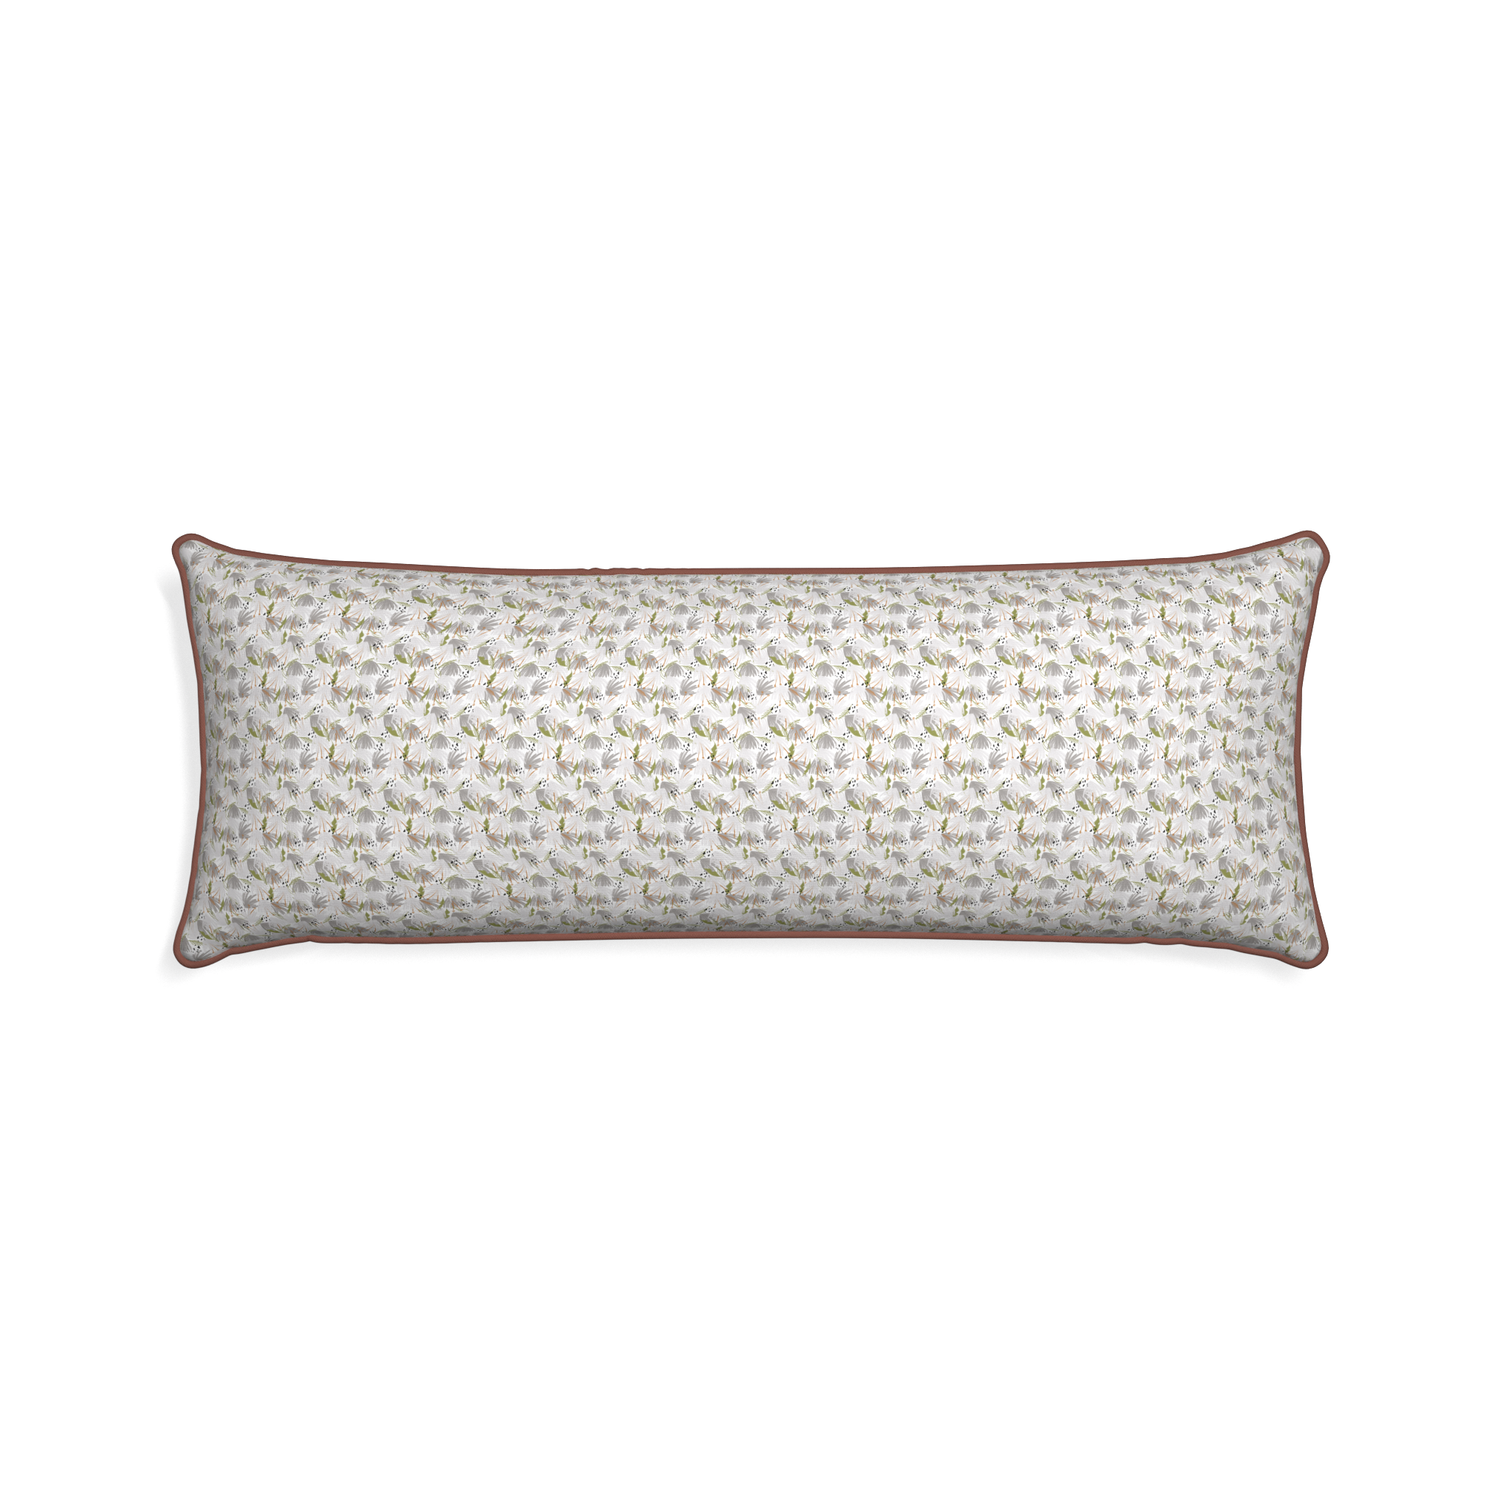 Xl-lumbar eden grey custom grey floralpillow with w piping on white background